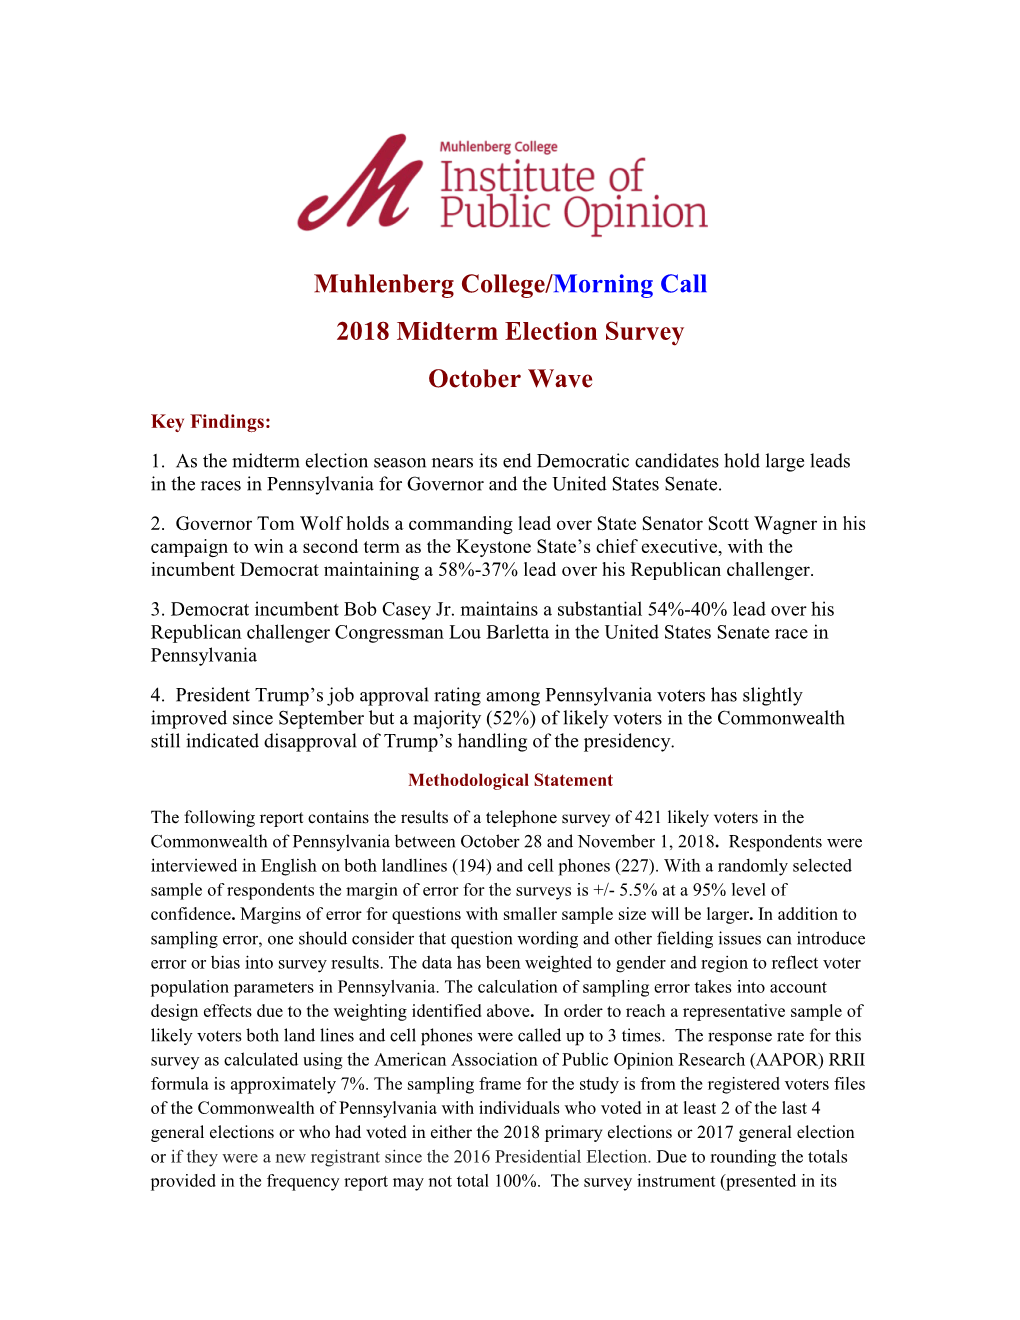 Muhlenberg College/Morning Call 2018 Midterm Election Survey October Wave Key Findings: 1